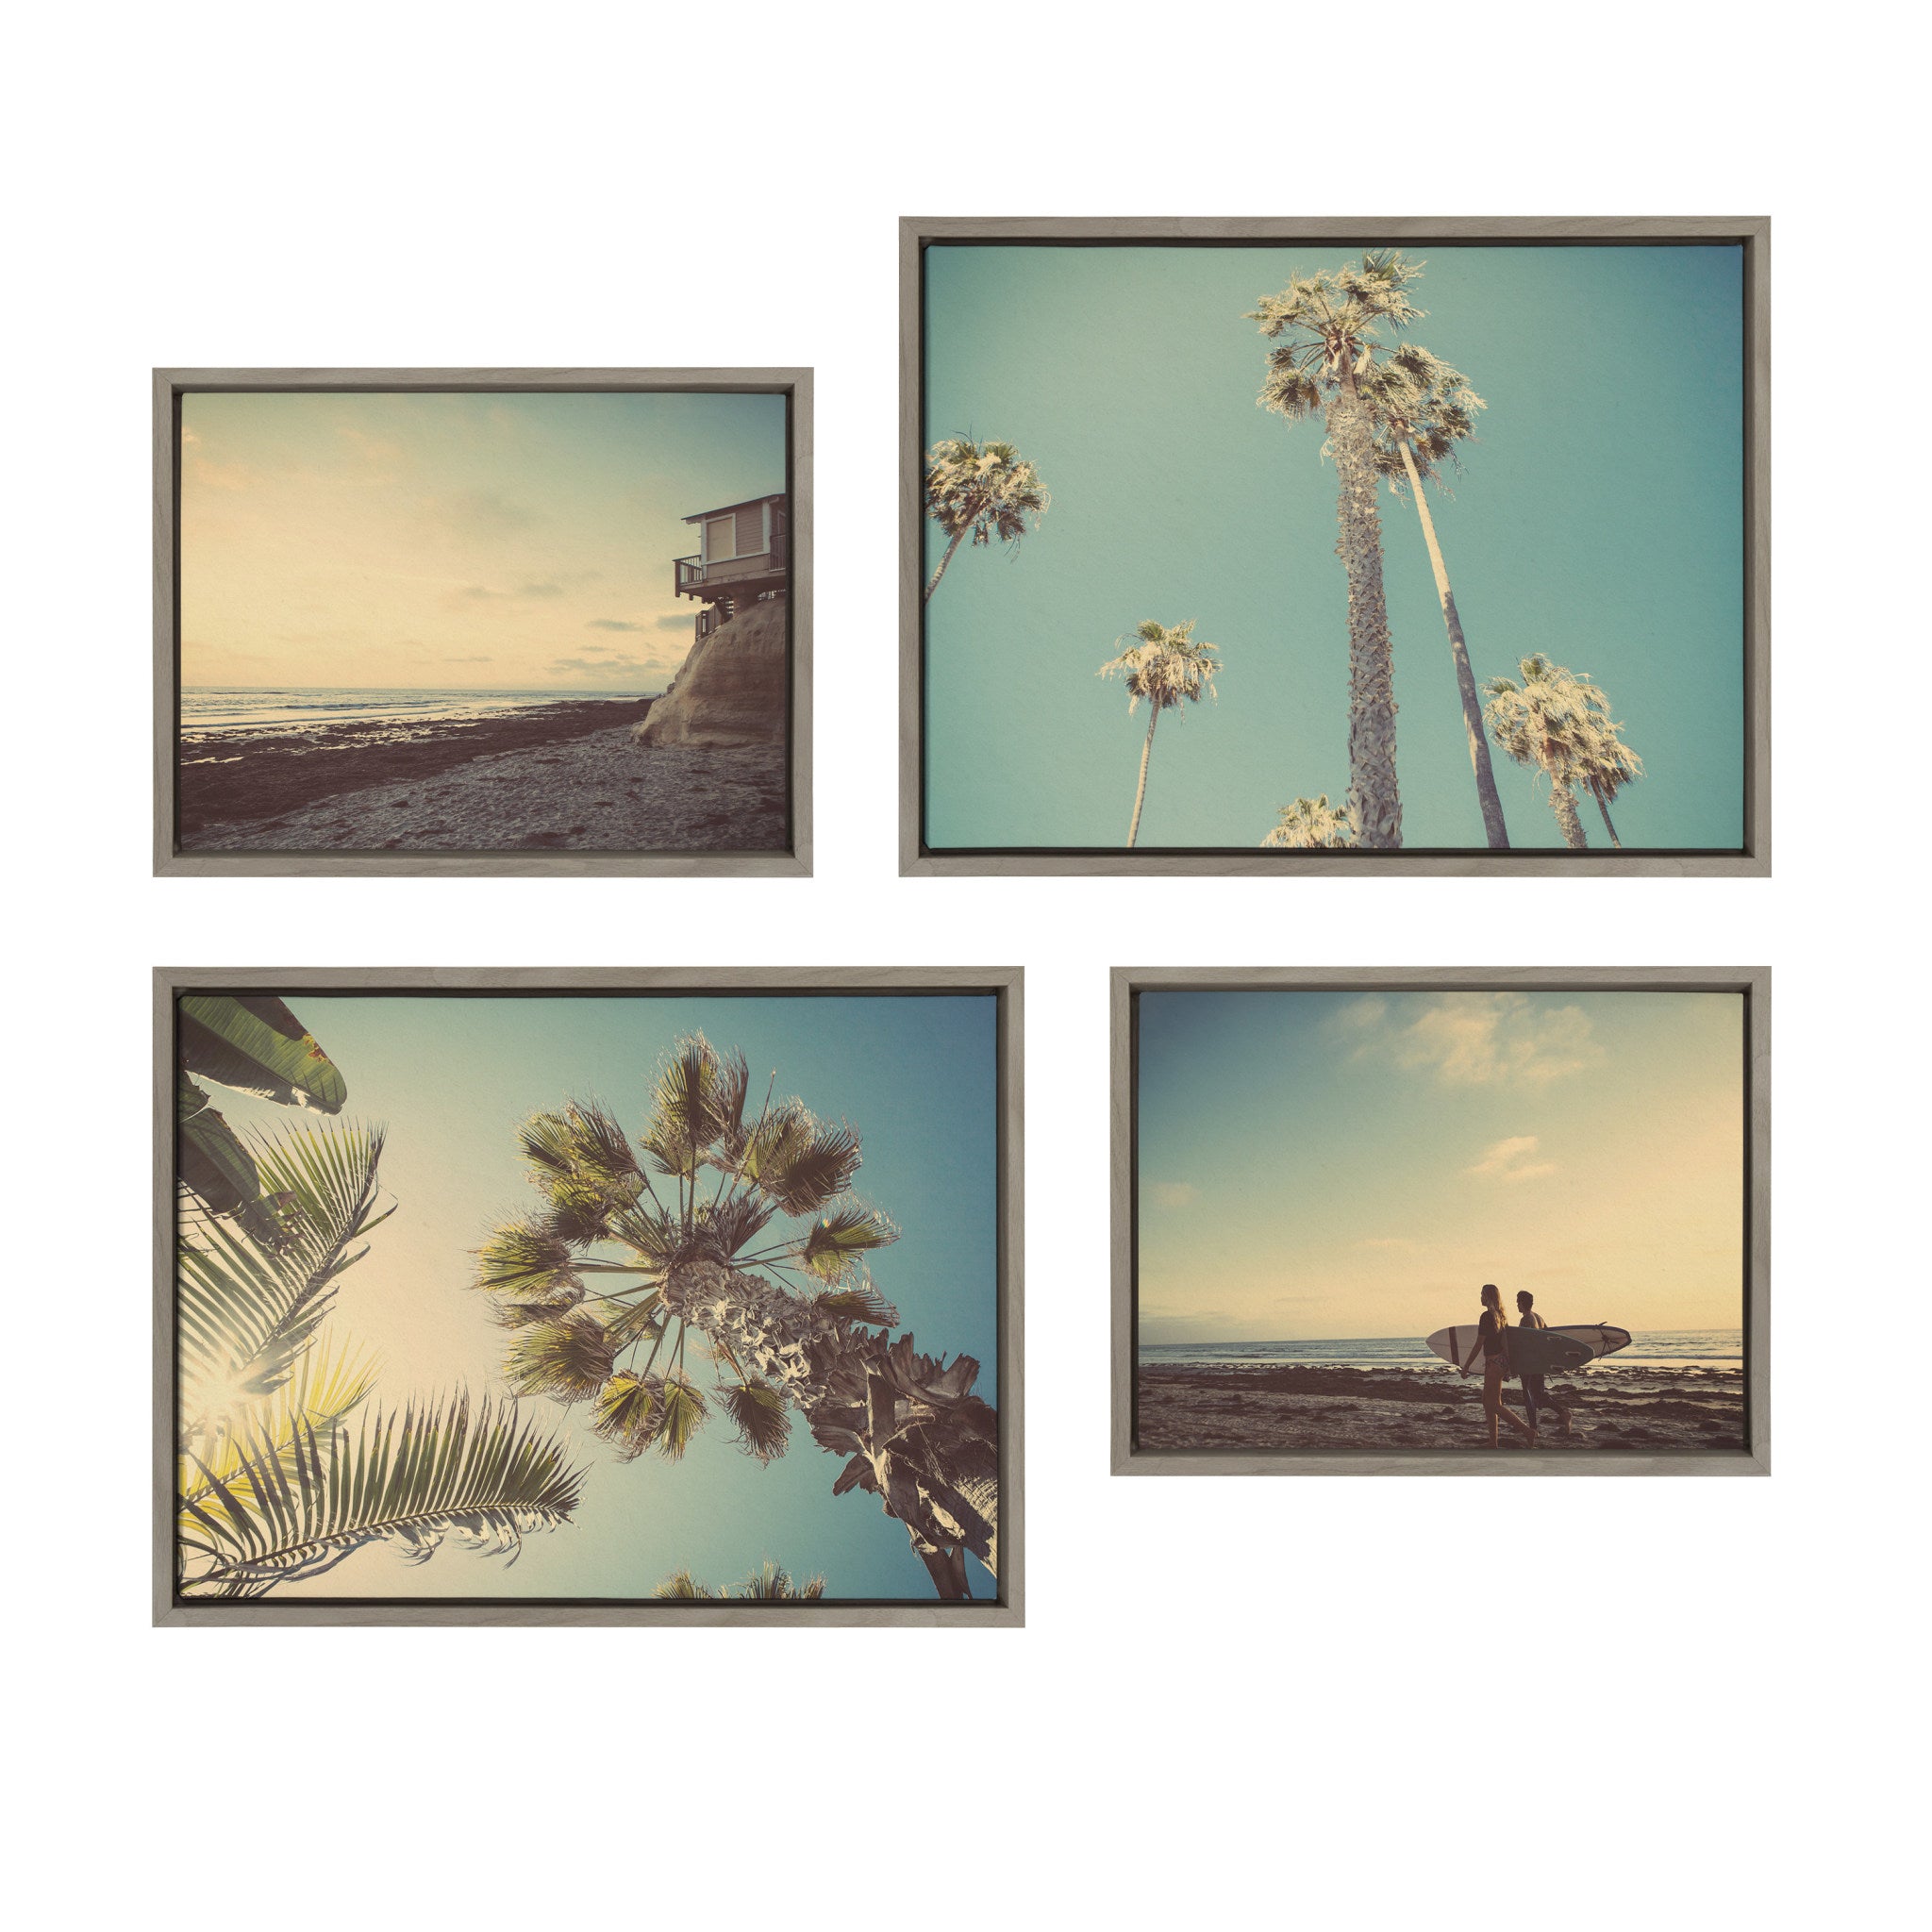 Sylvie House on Beach, Palm Trees in Lajolla, Palm Tree Sunburst and Surfers Framed Canvas Art Set by Saint and Sailor Studios